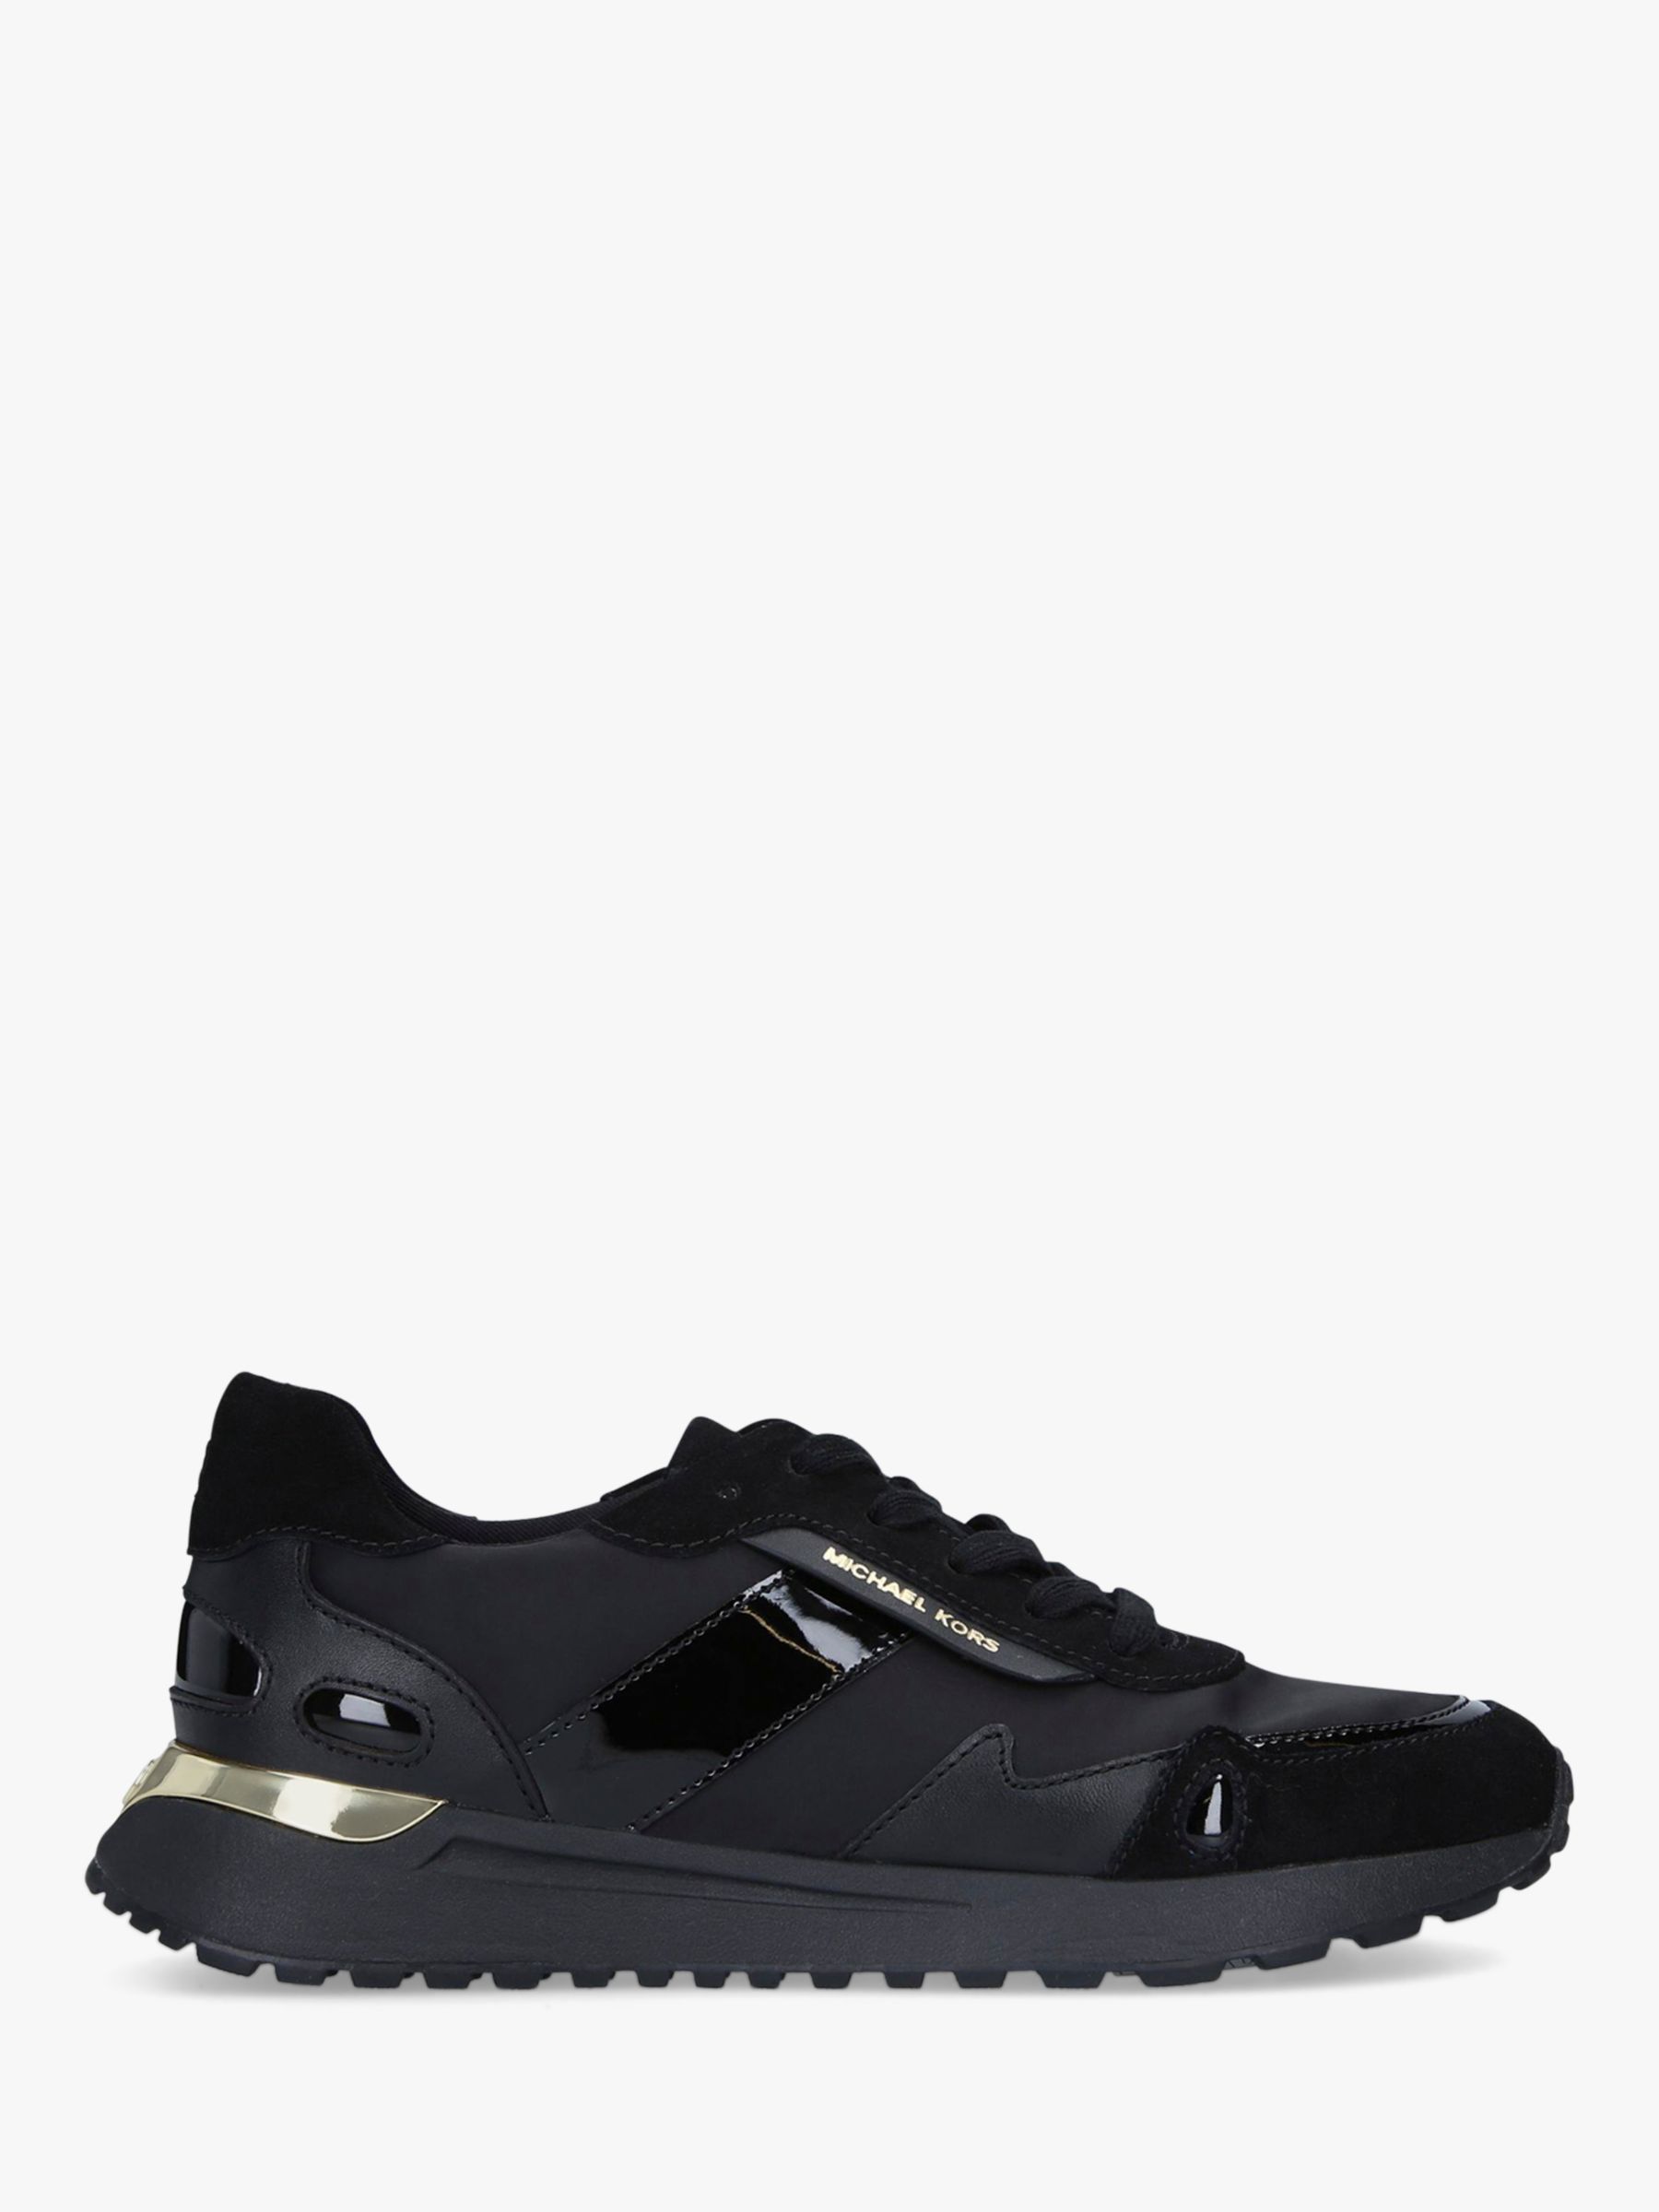 michael kors trainers black and gold